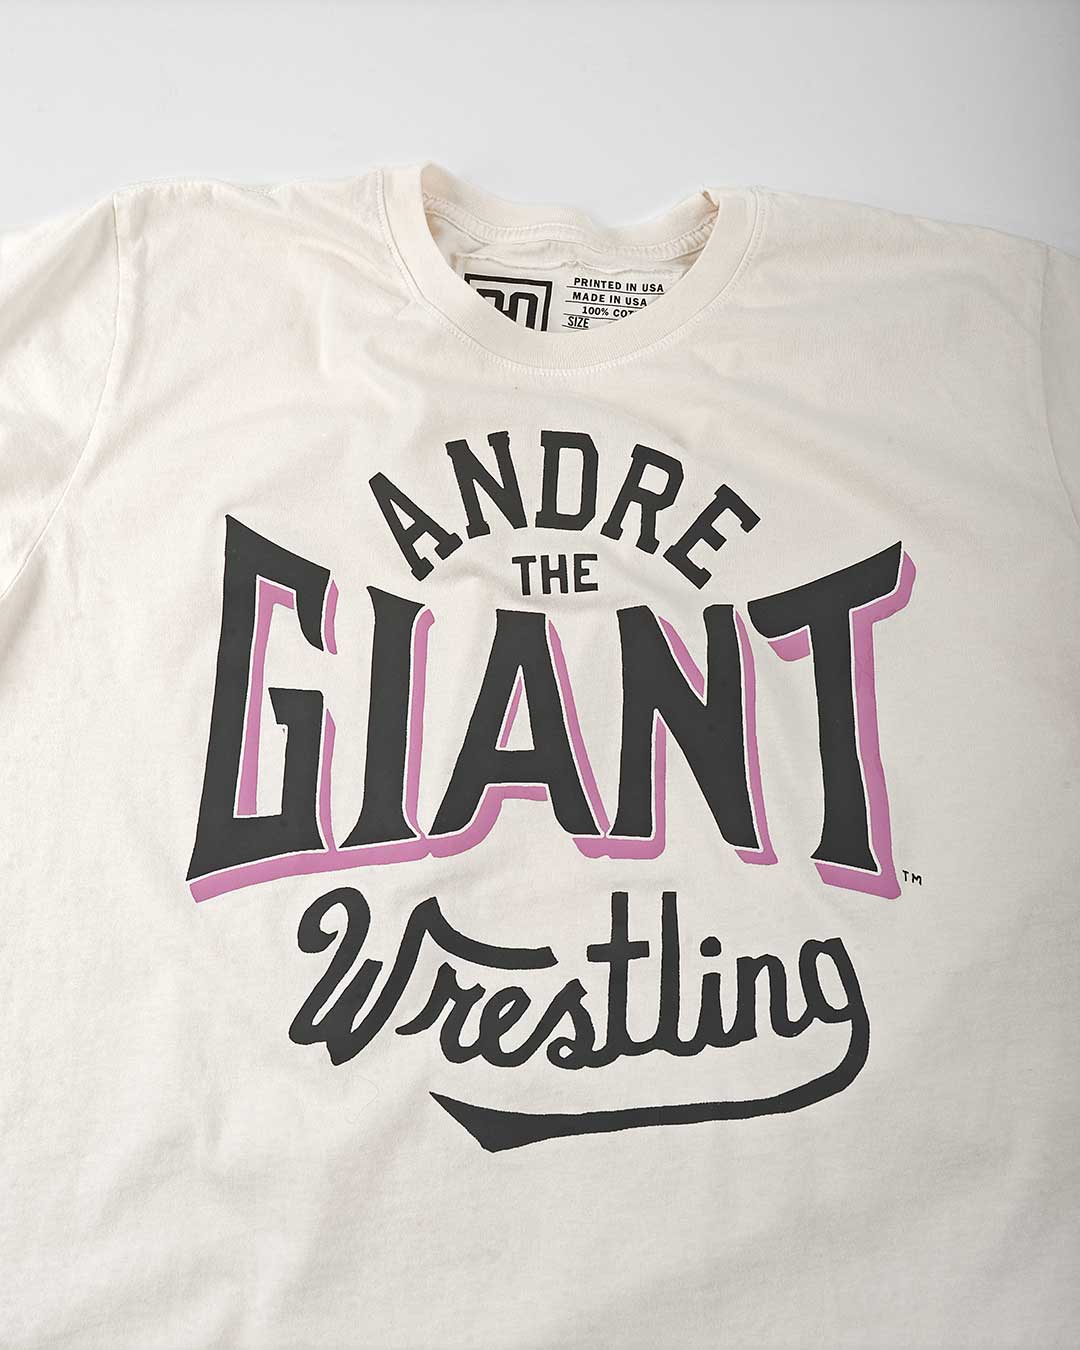 Andre the Giant Wrestling White Tee - Roots of Fight